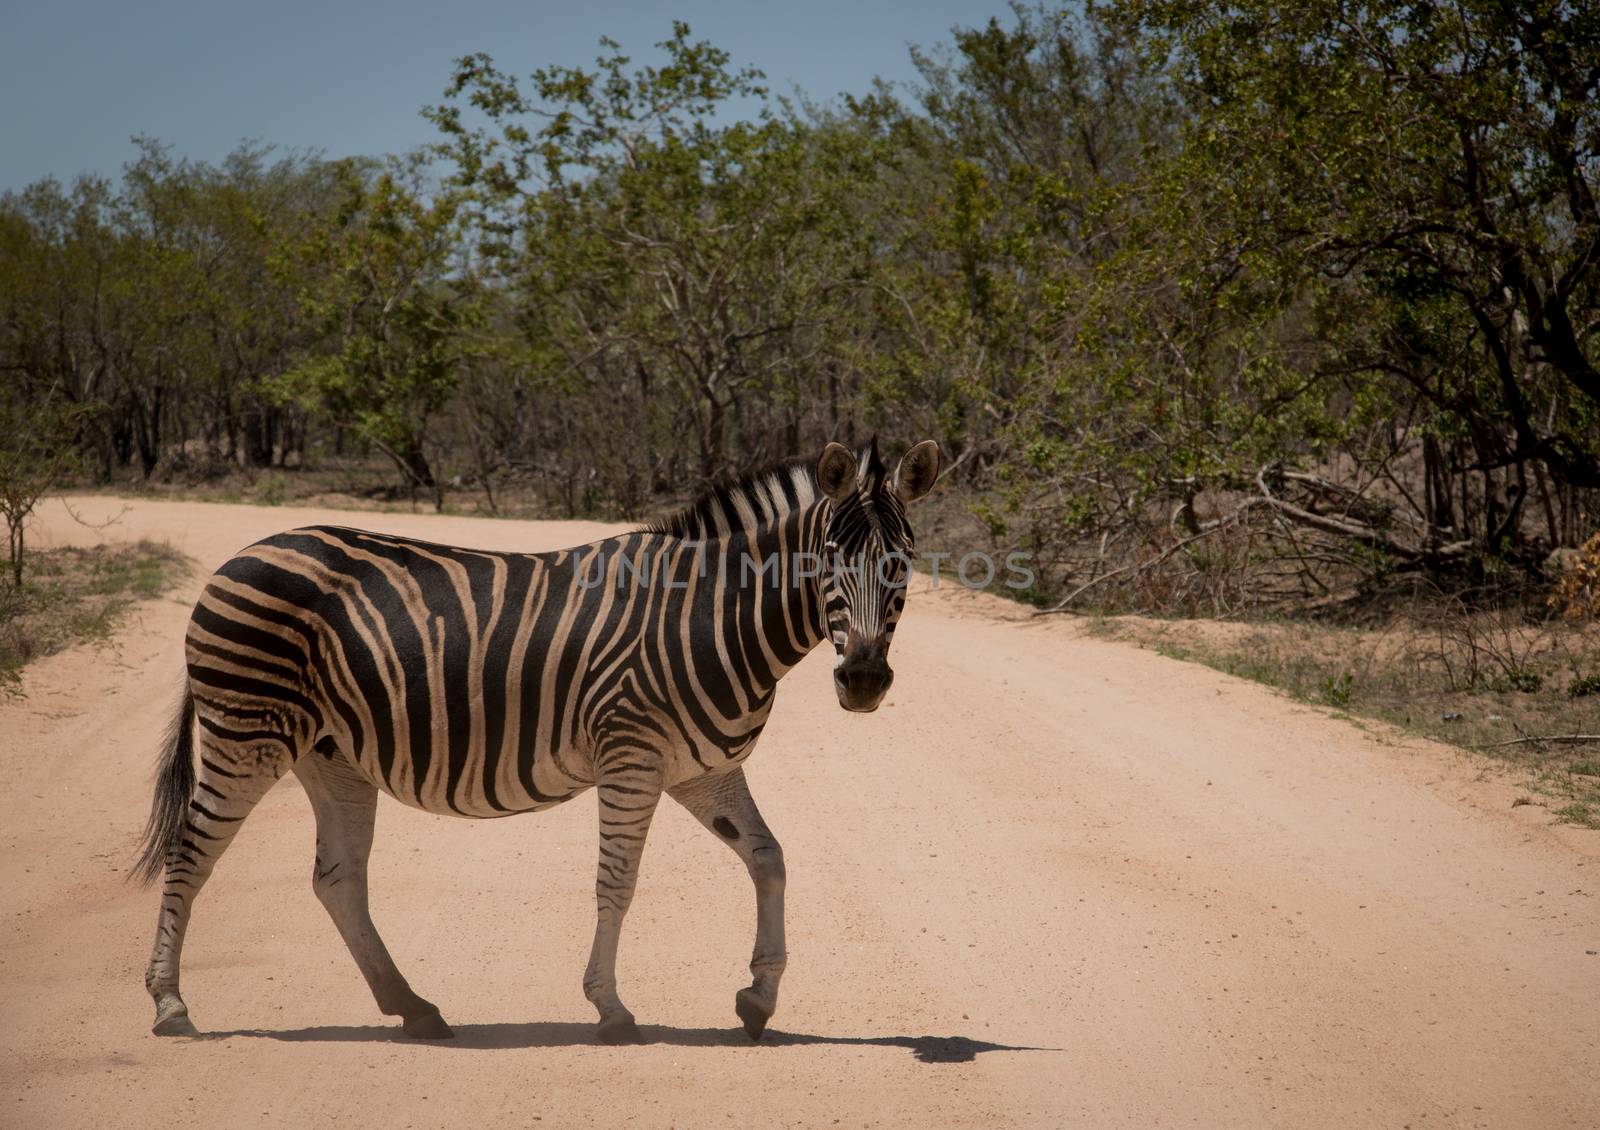 Zebra walking on the road in the Kruger National Park, South Africa.